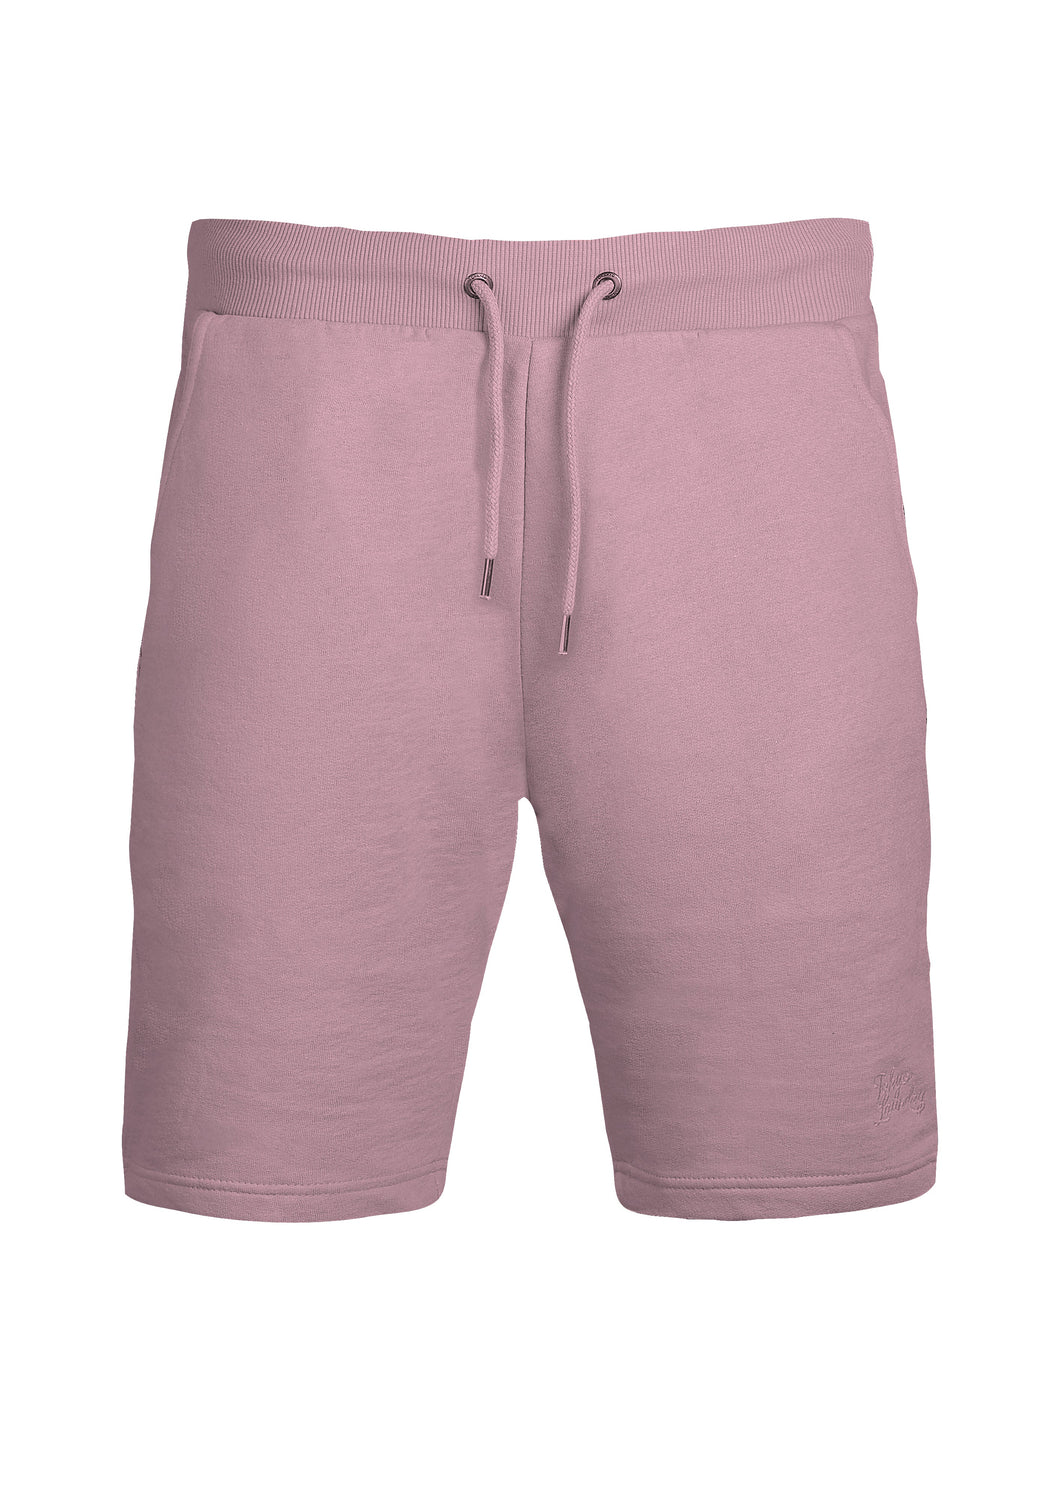 SHORTS - FLEECE - WITH   DRAW STRING - PINK